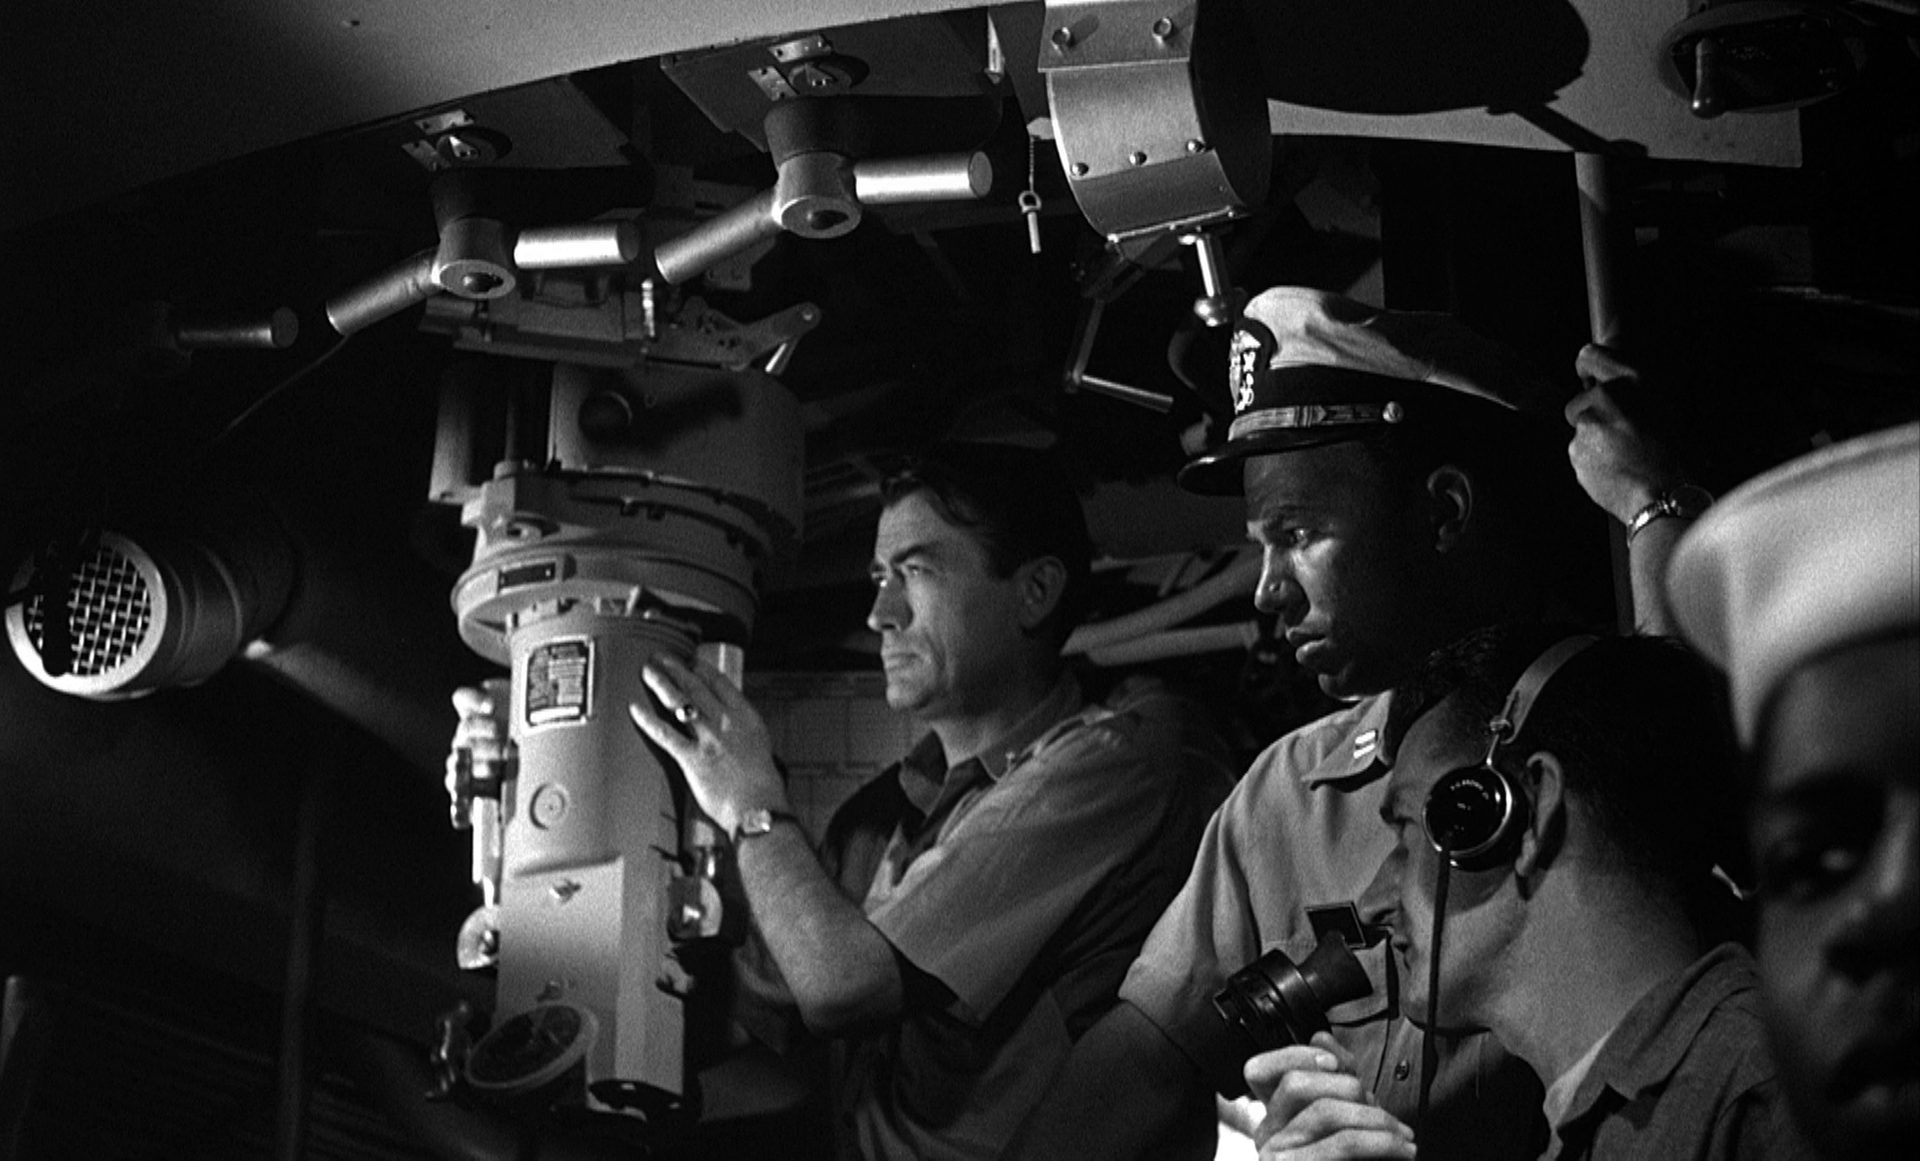 Oppressive black and white shot from the inside of the submarine, with Gregory Peck as commander in the presence of some sailors.